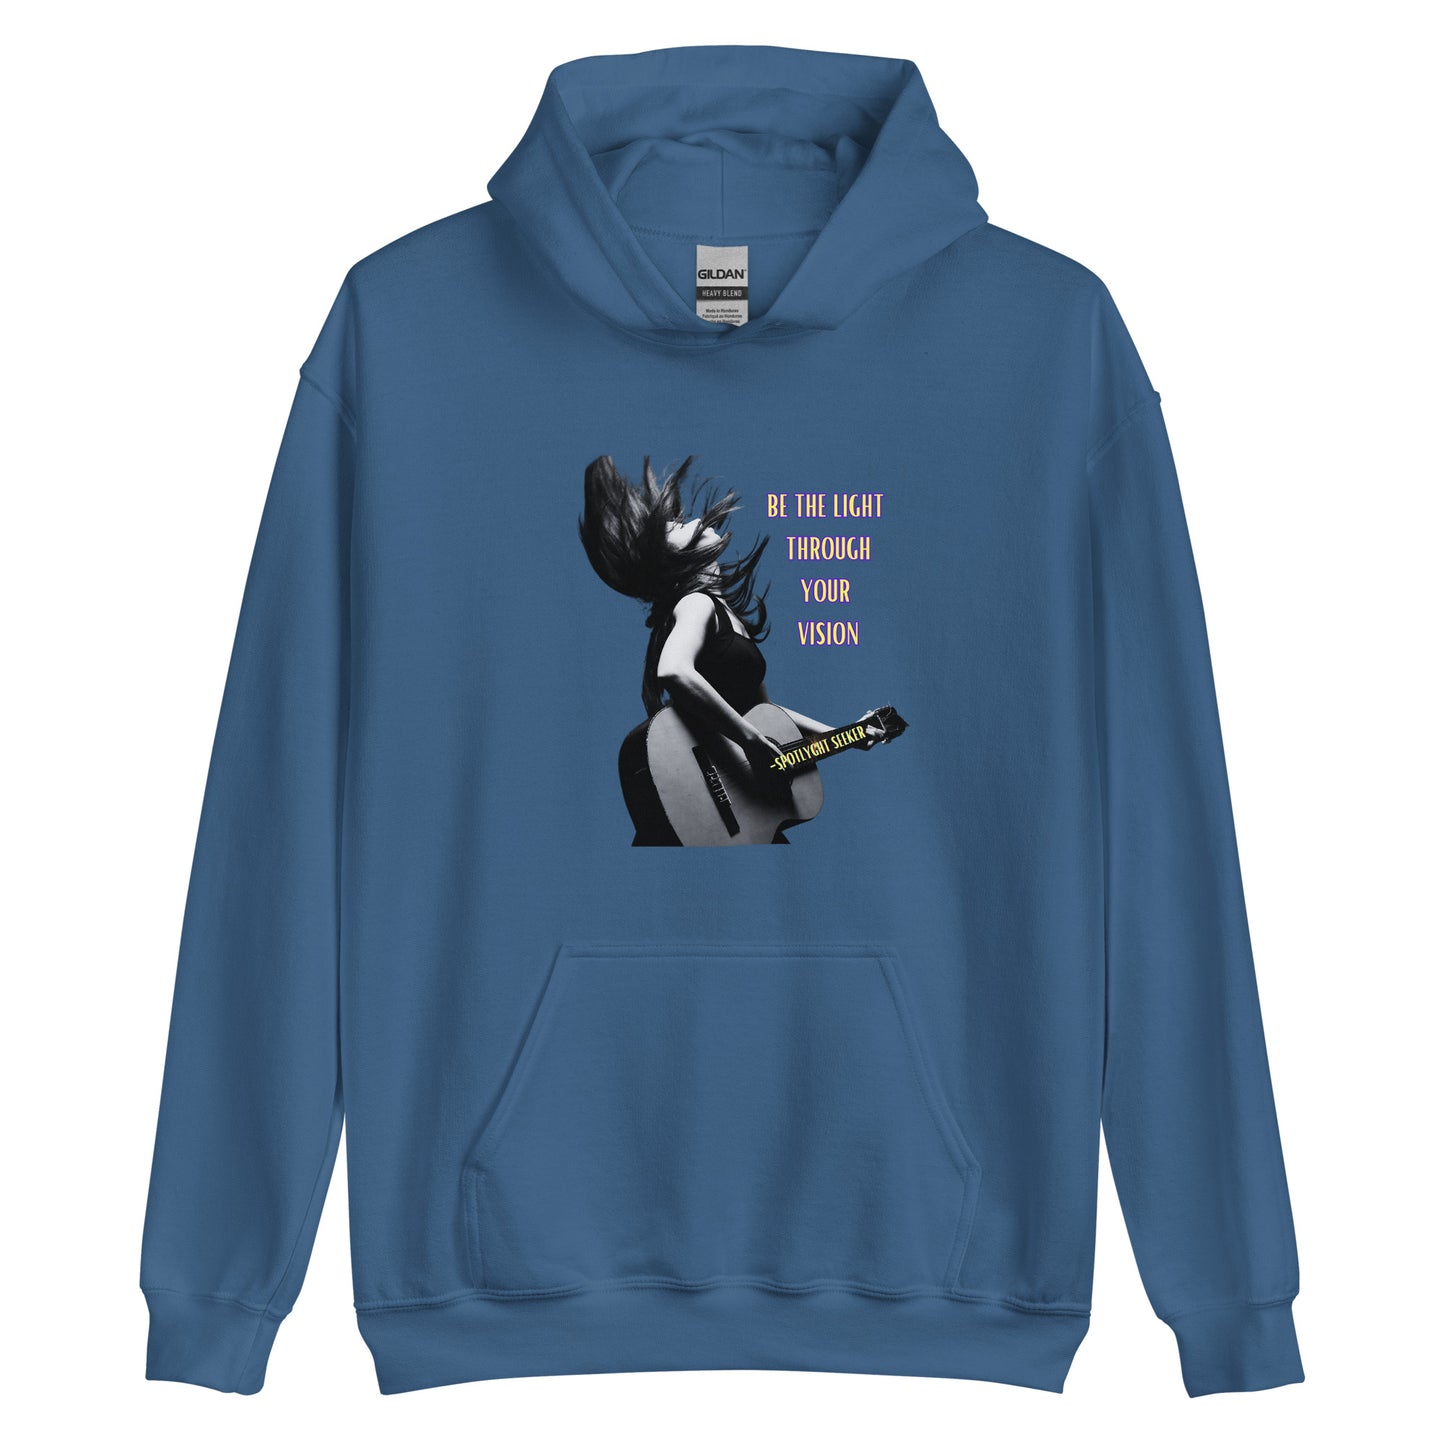 A stylish black and white Heavyweight Be the Light Unisex Hoodie displayed against a backdrop of creativity. The bold graphics symbolize authenticity, inviting artists to embrace their vision and be the light for their audience. Blue